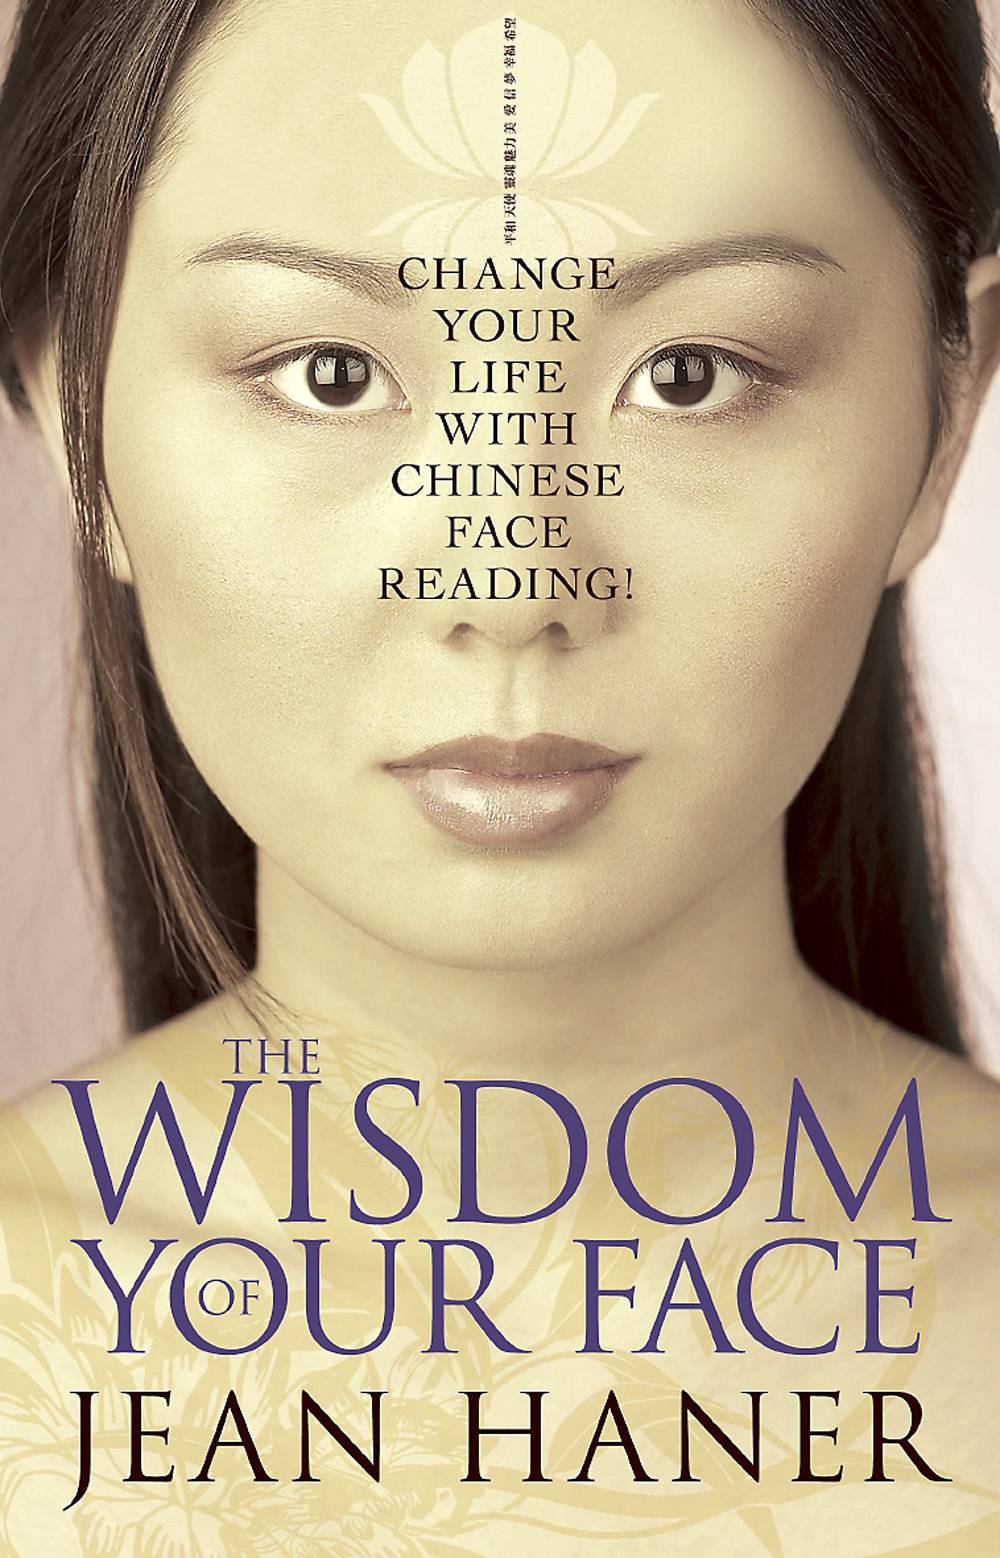 Wisdom of your face - change your life with chinese face reading!